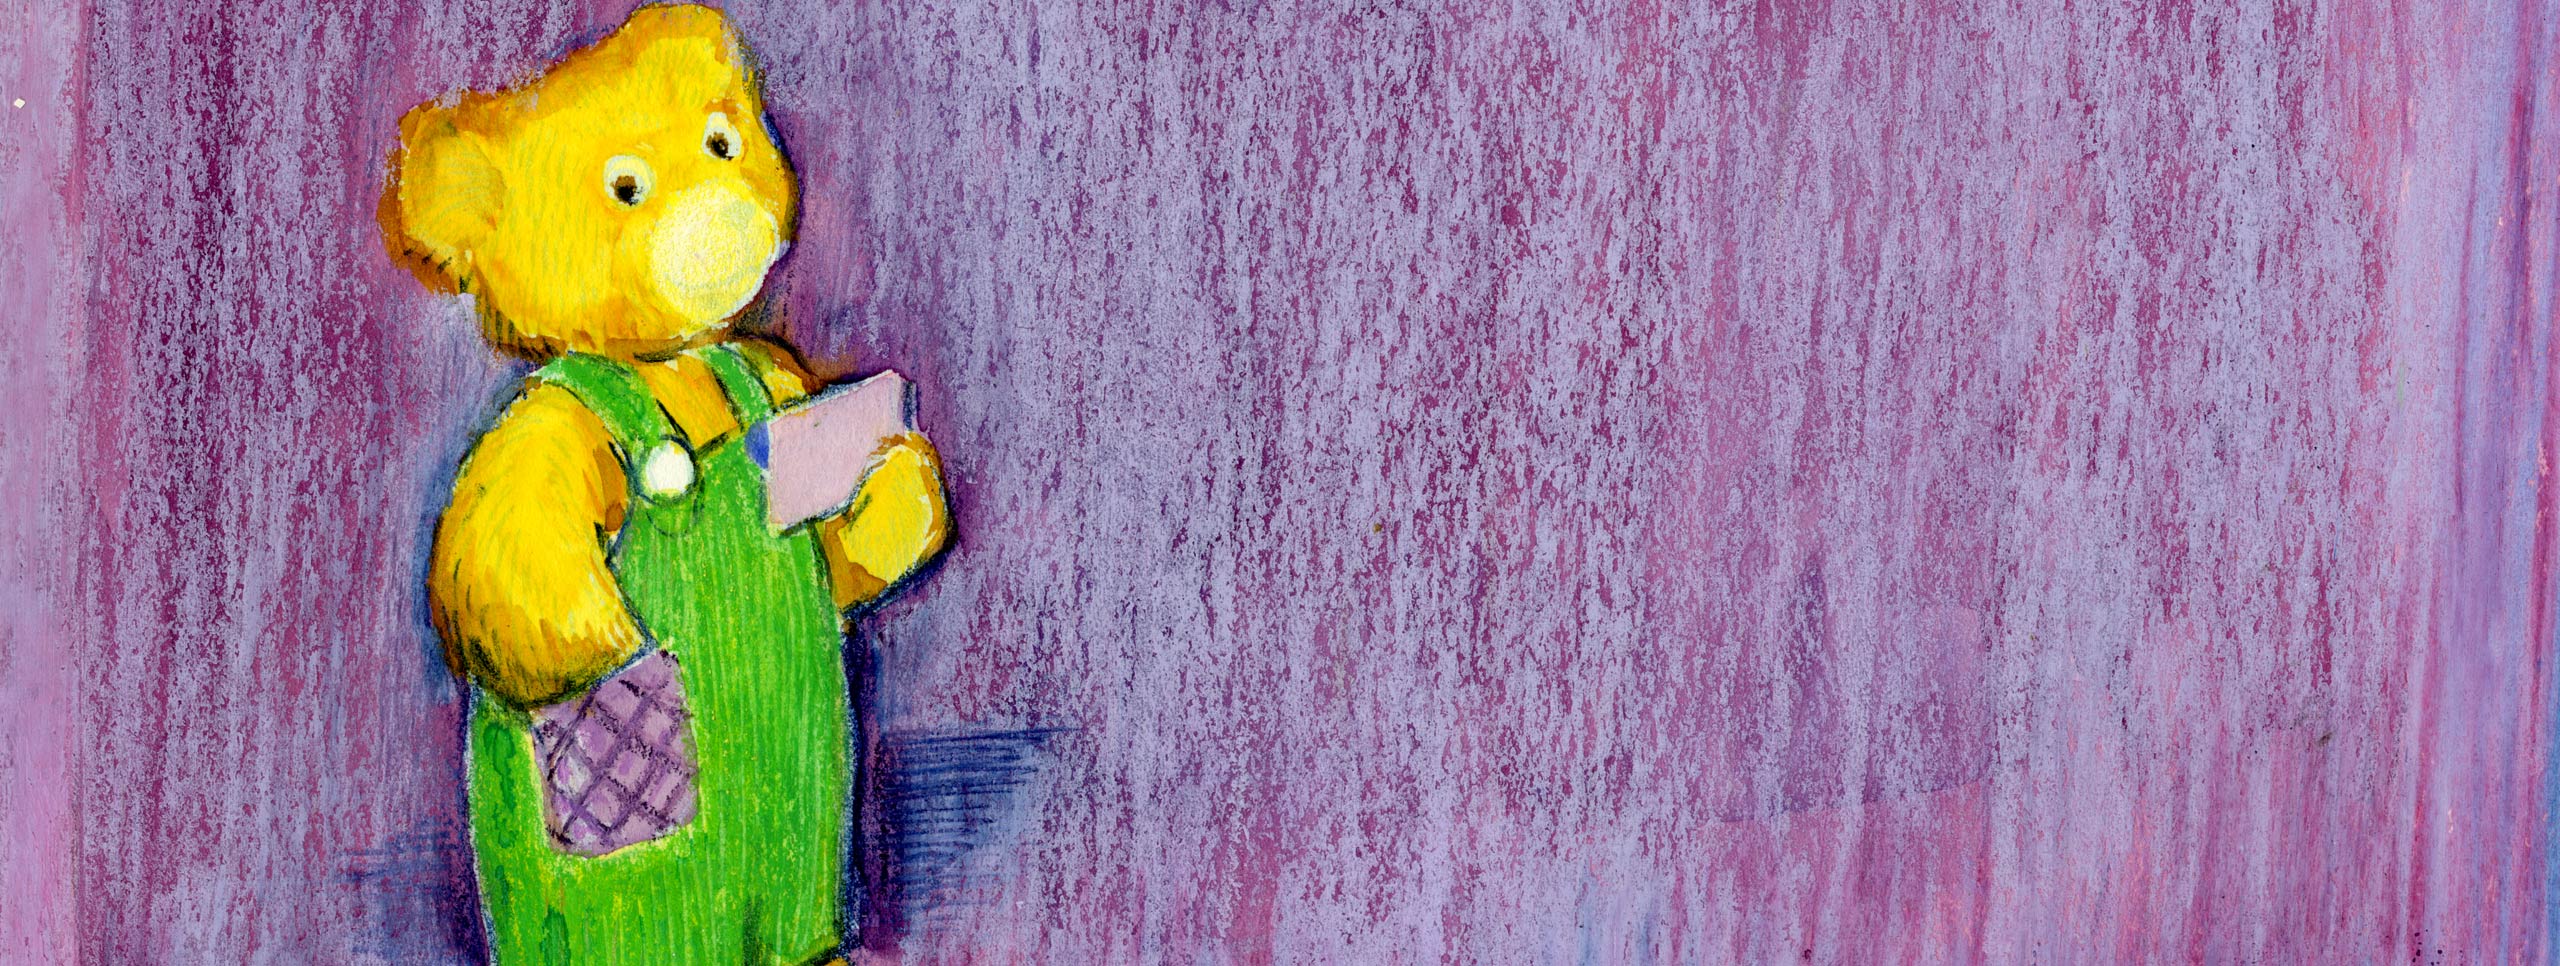 Purple backdrop with a gold teddy bear. The bear is wearing green overalls with a purple pocket and is holding a notecard